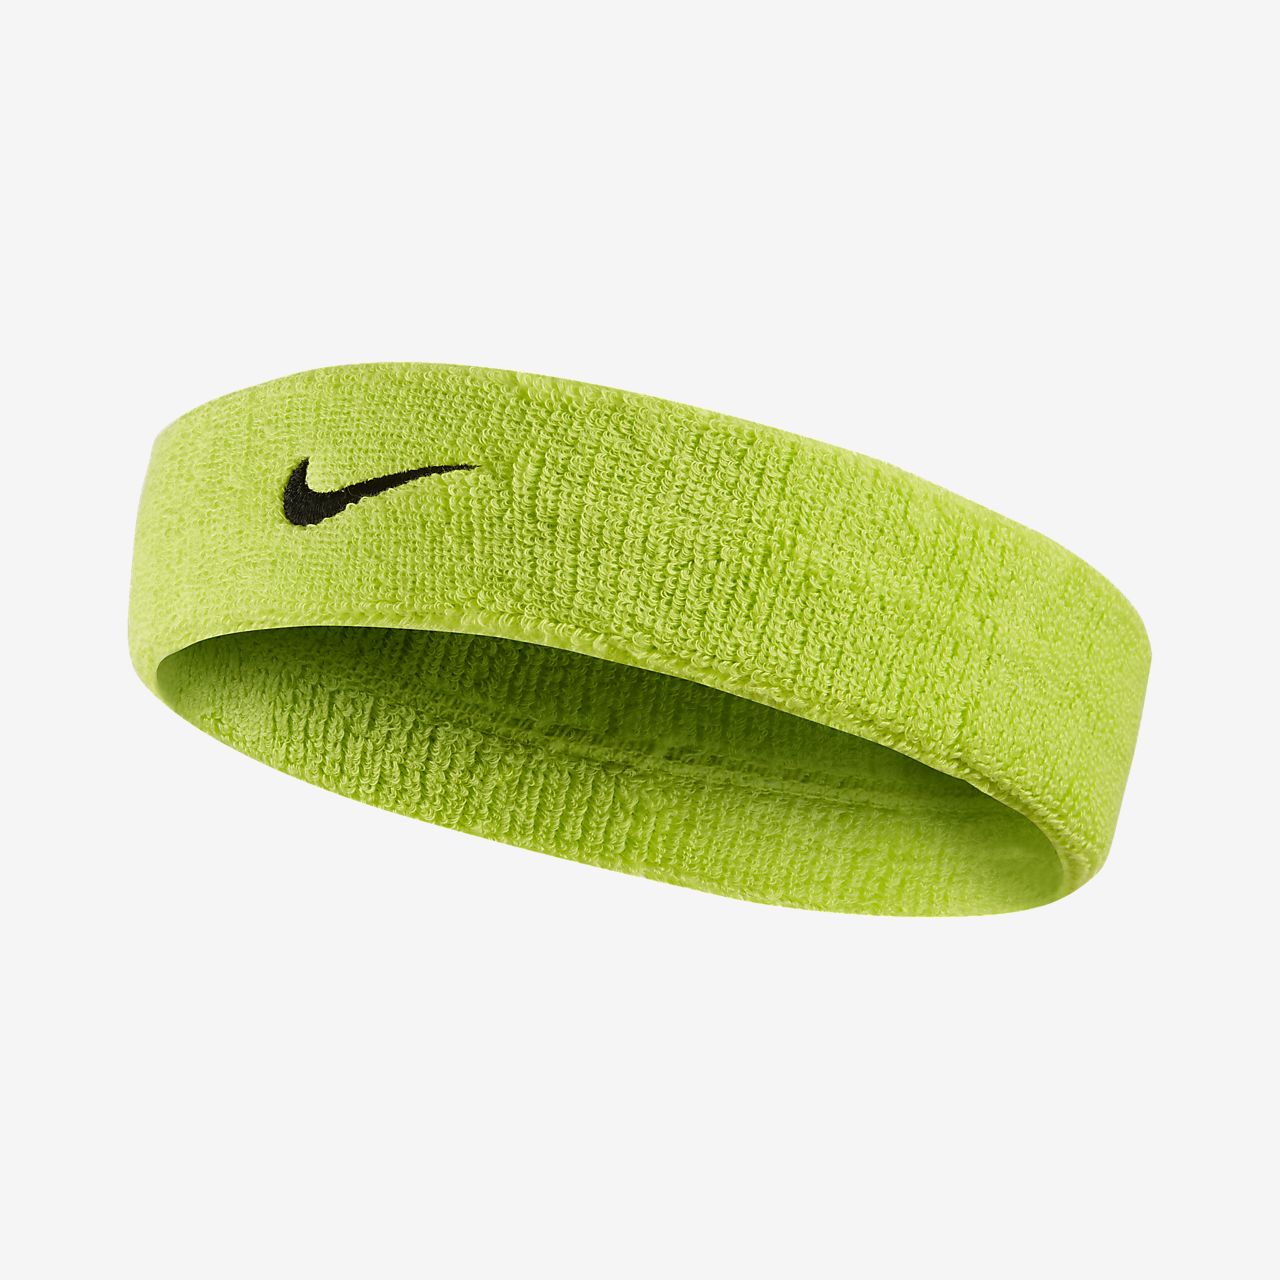 [NIKE Official]Nike Swoosh Headband.Online store (mail order site)